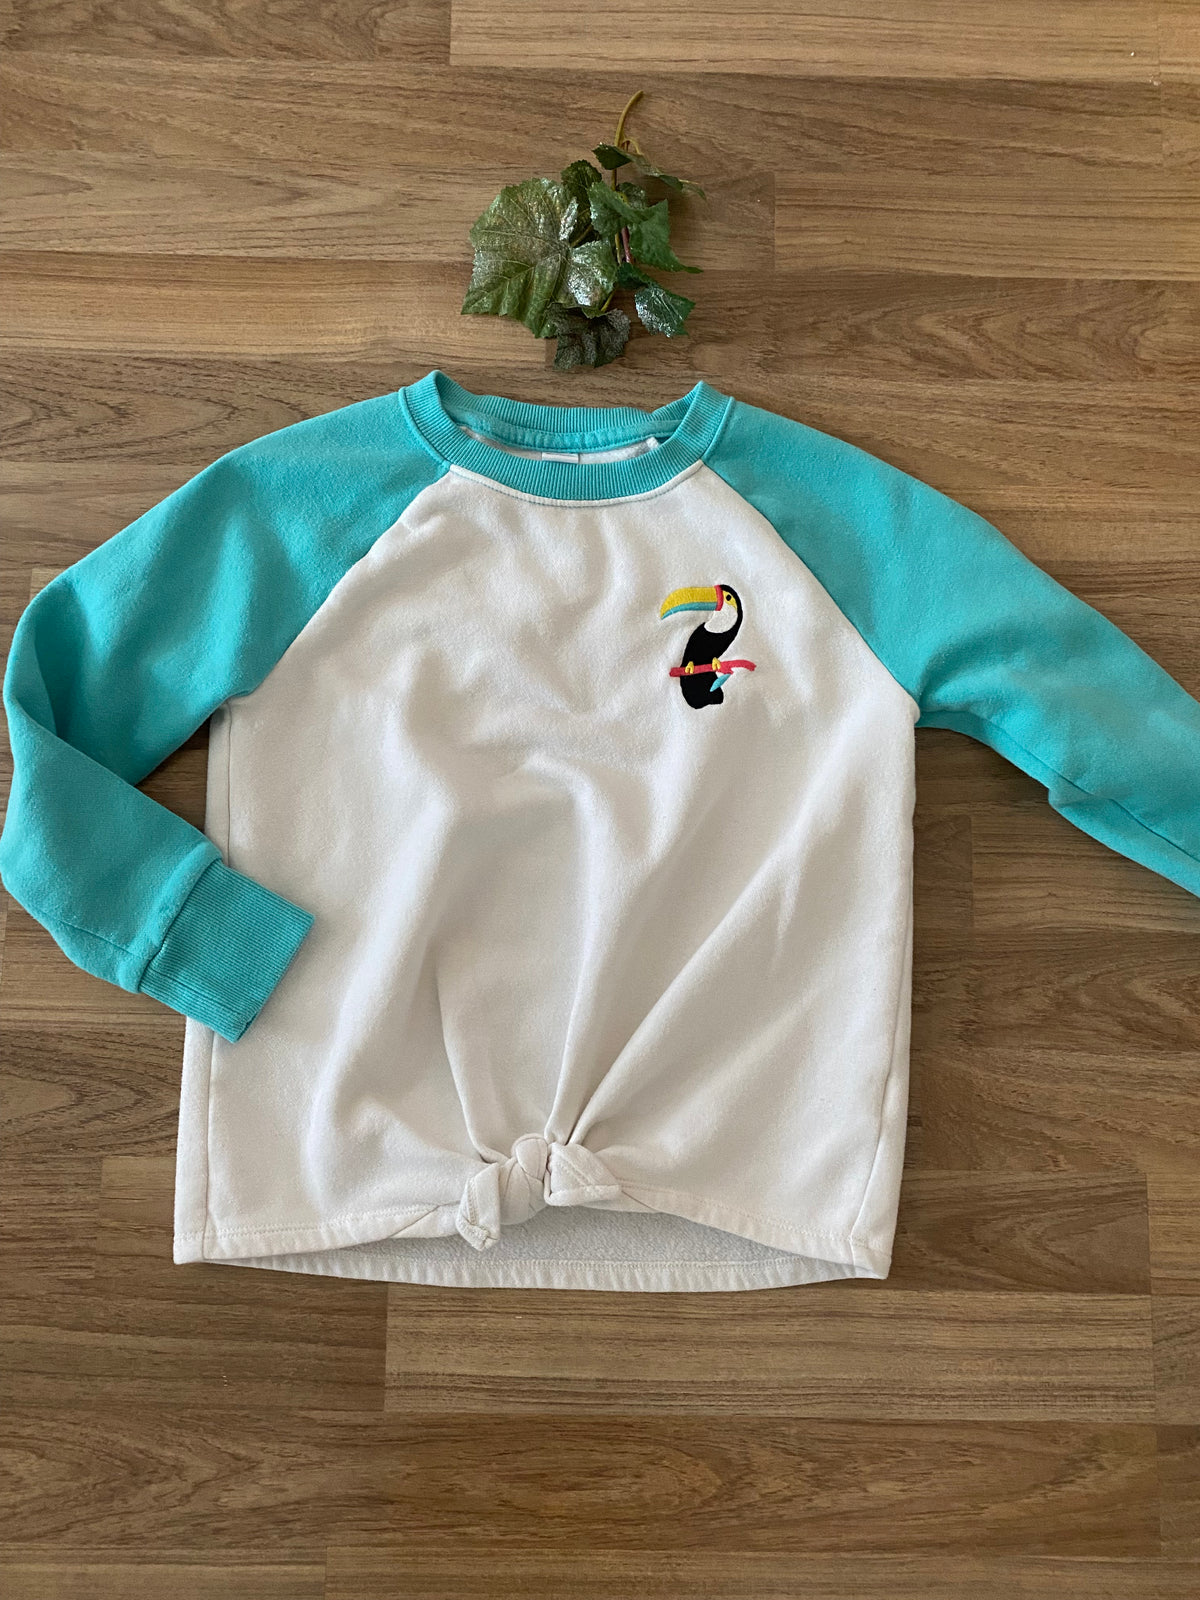 Long Sleeve Graphic Sweater (Girls Size 8)